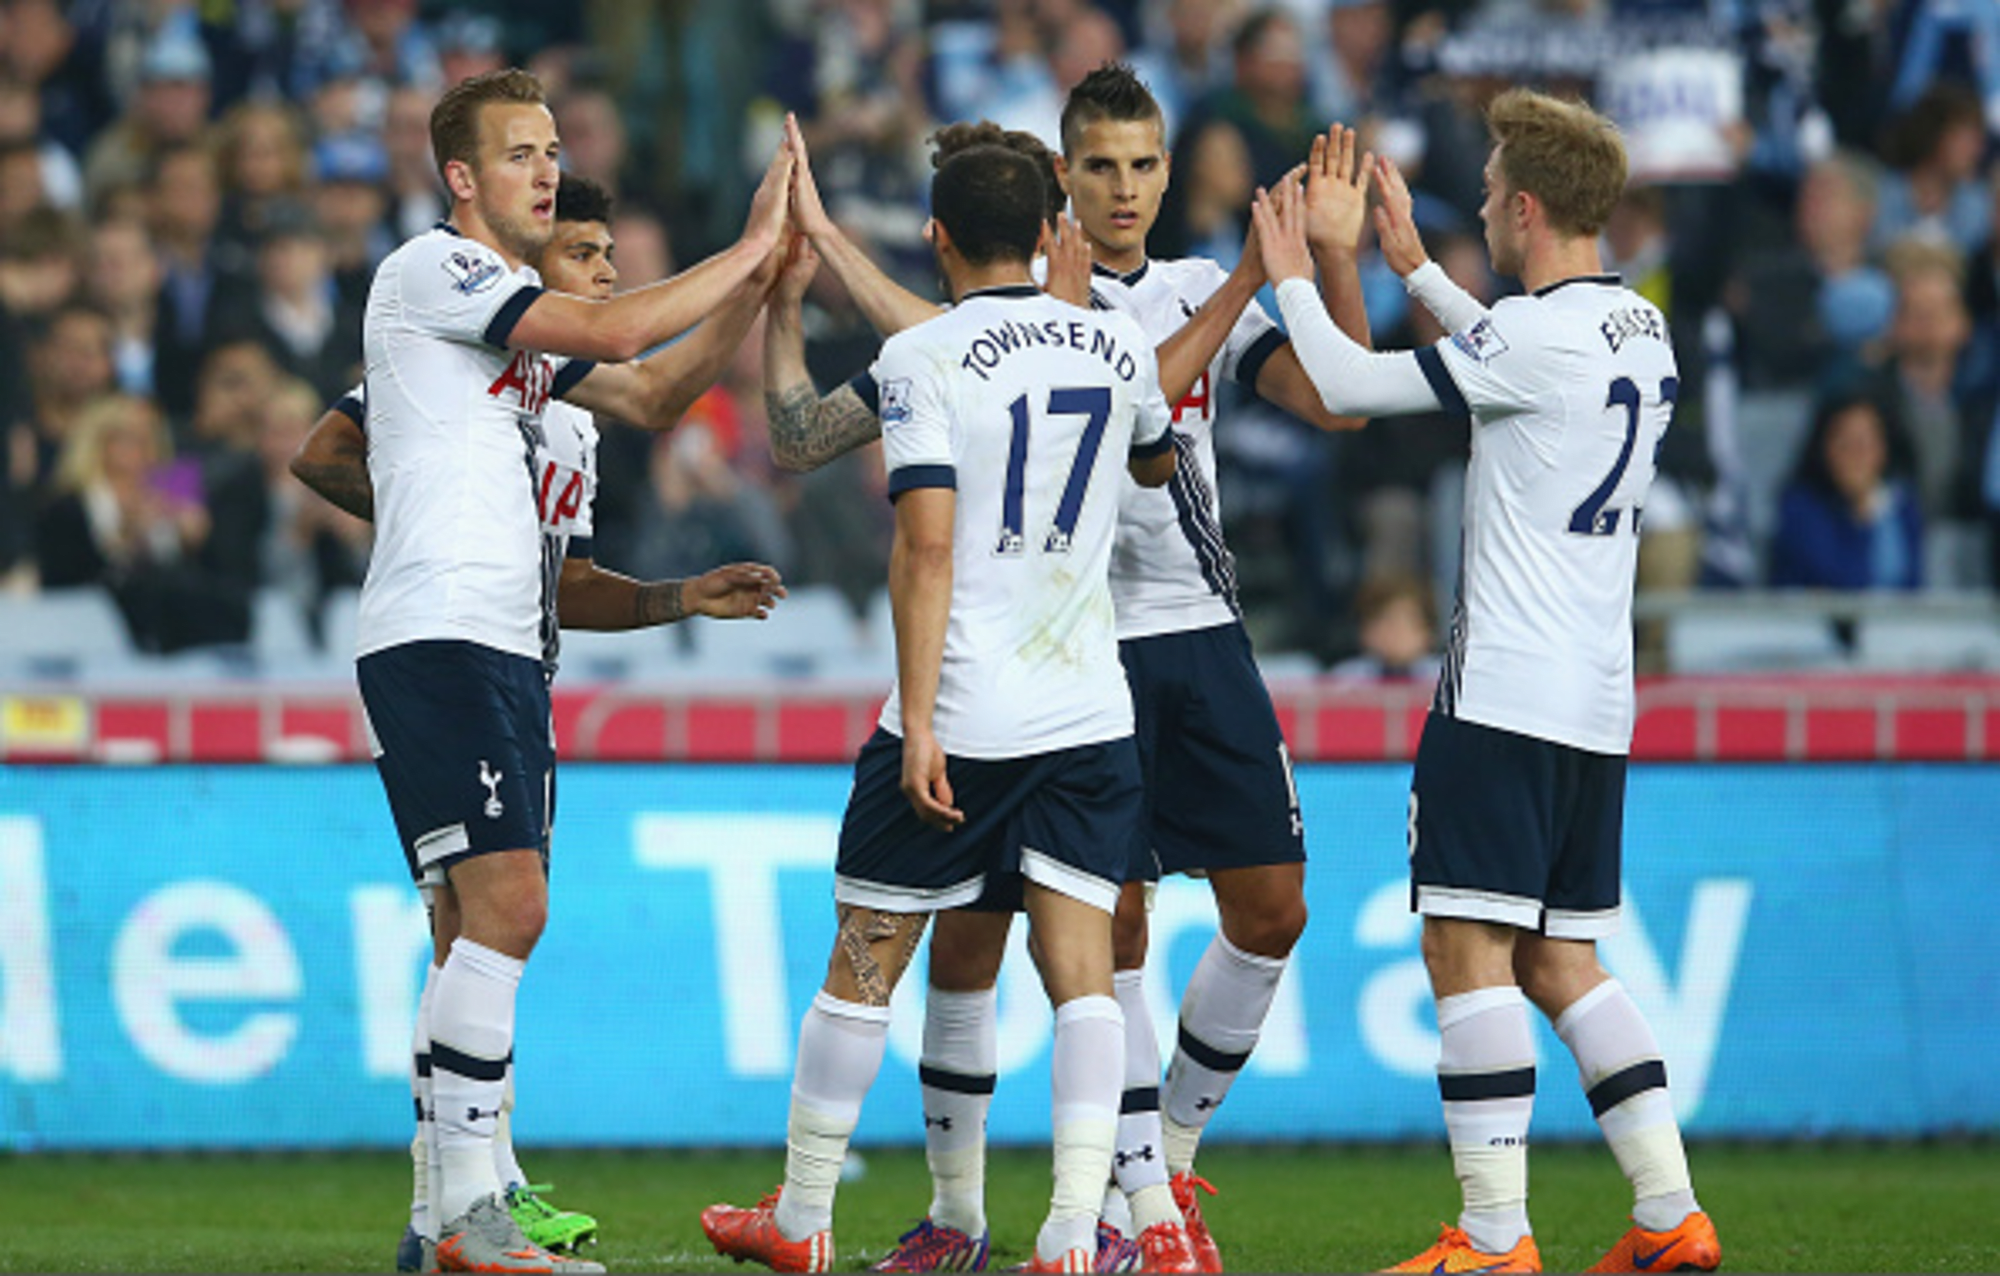 Epl 2014 15 Season Review Tottenham Hotspur Miss Out Of Champions League Football Yet Again